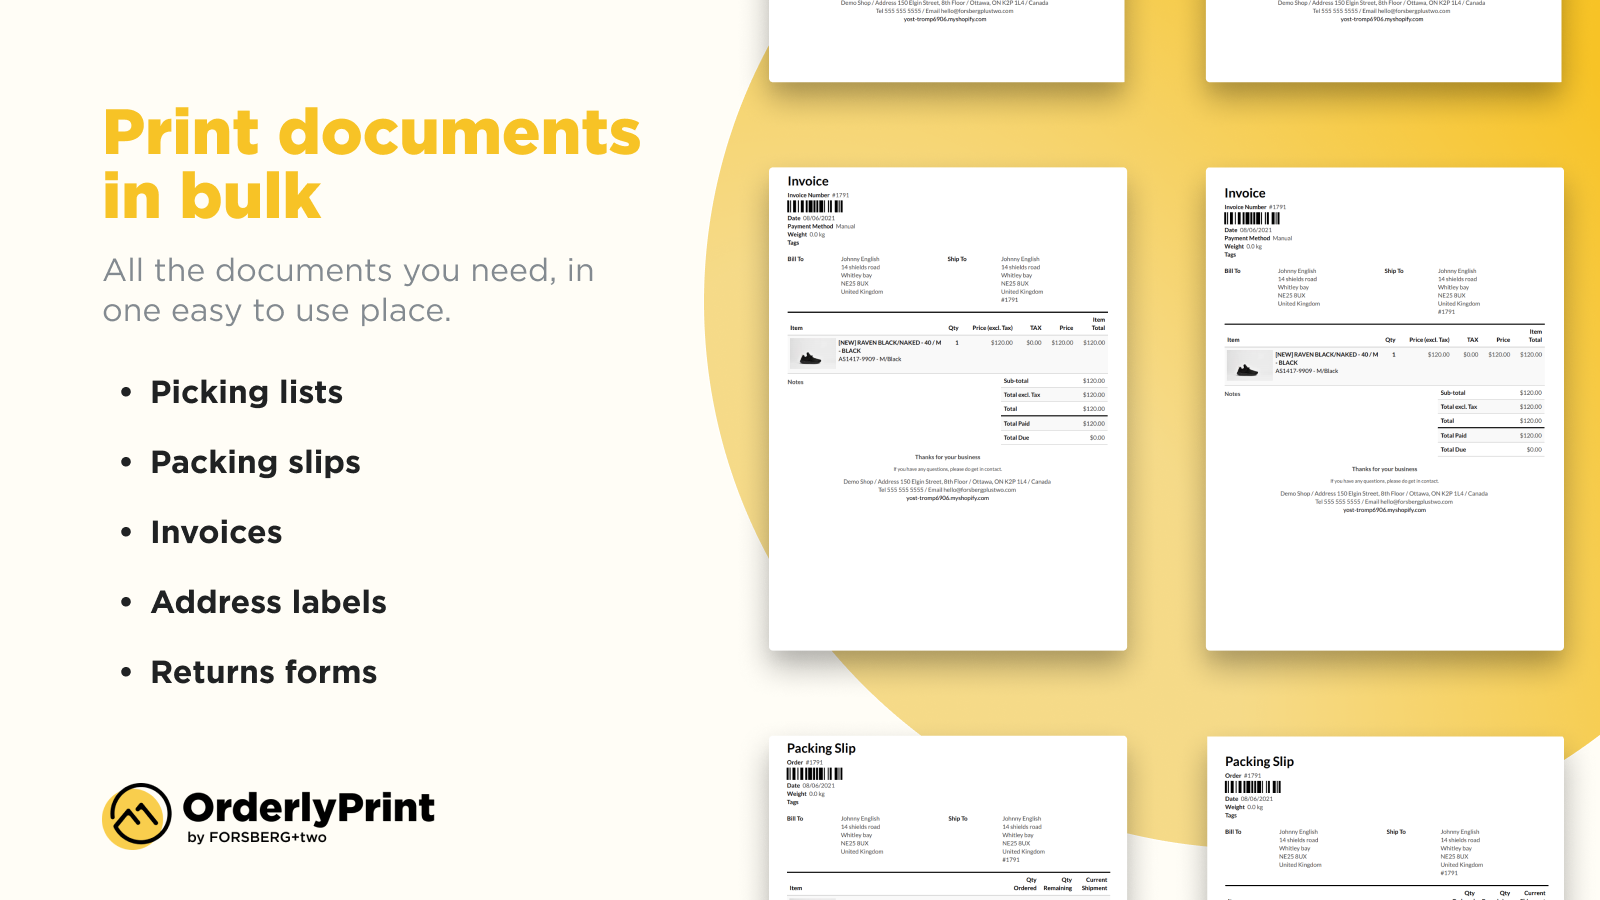 All the documents you need in once place